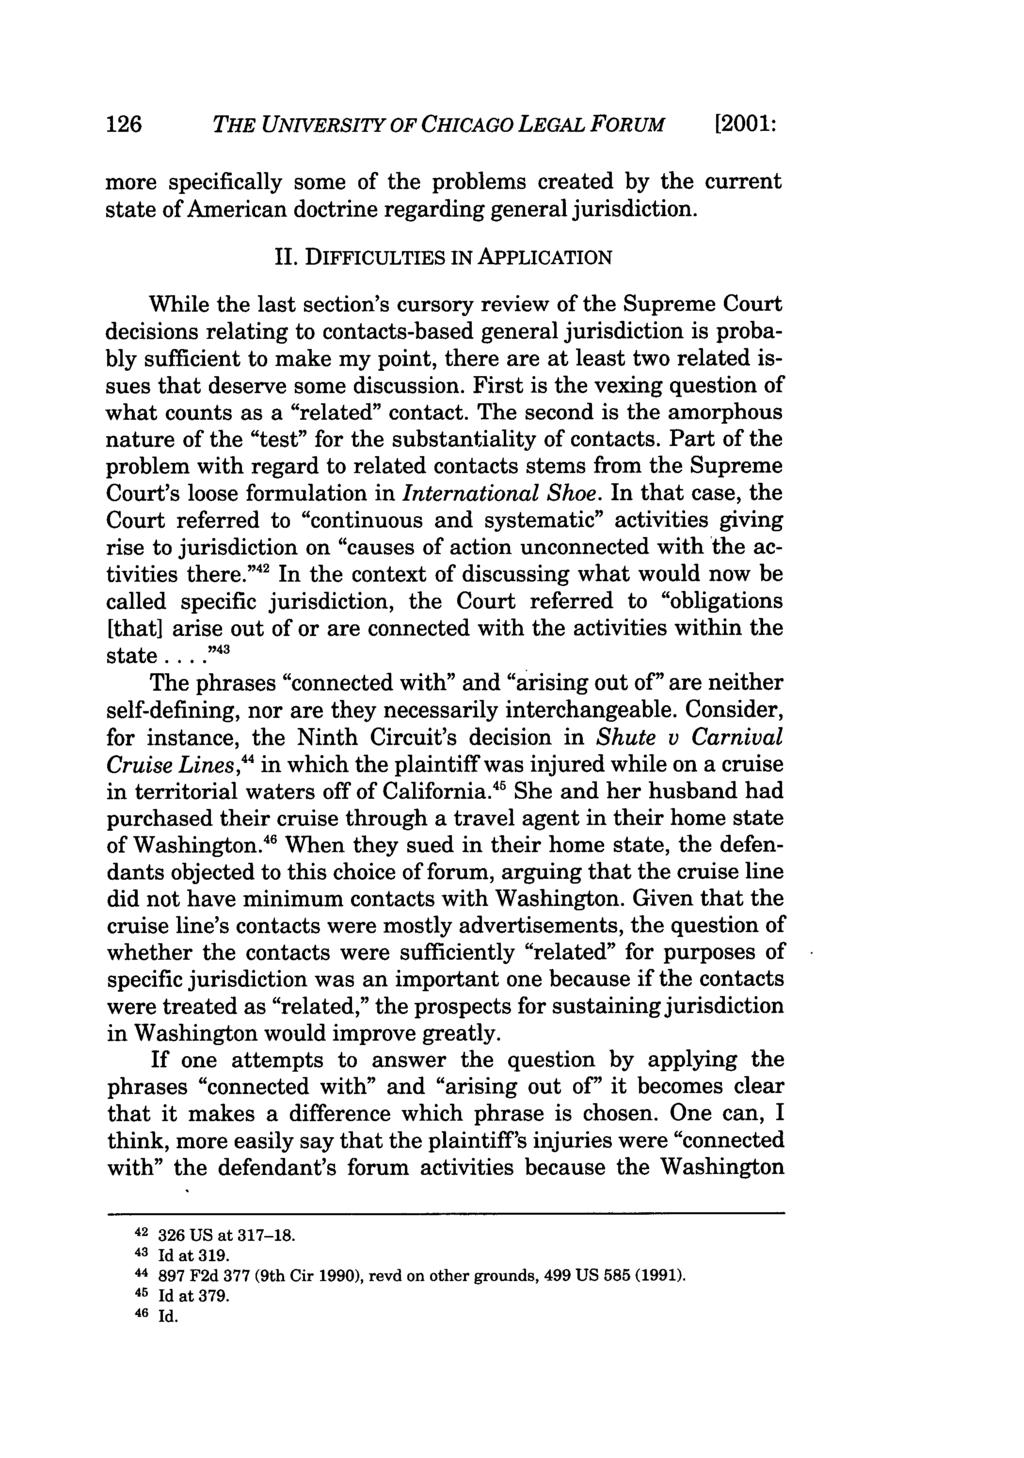 126 THE UNIVERSITY OF CHICAGO LEGAL FORUM [2001: more specifically some of the problems created by the current state of American doctrine regarding general jurisdiction. II.